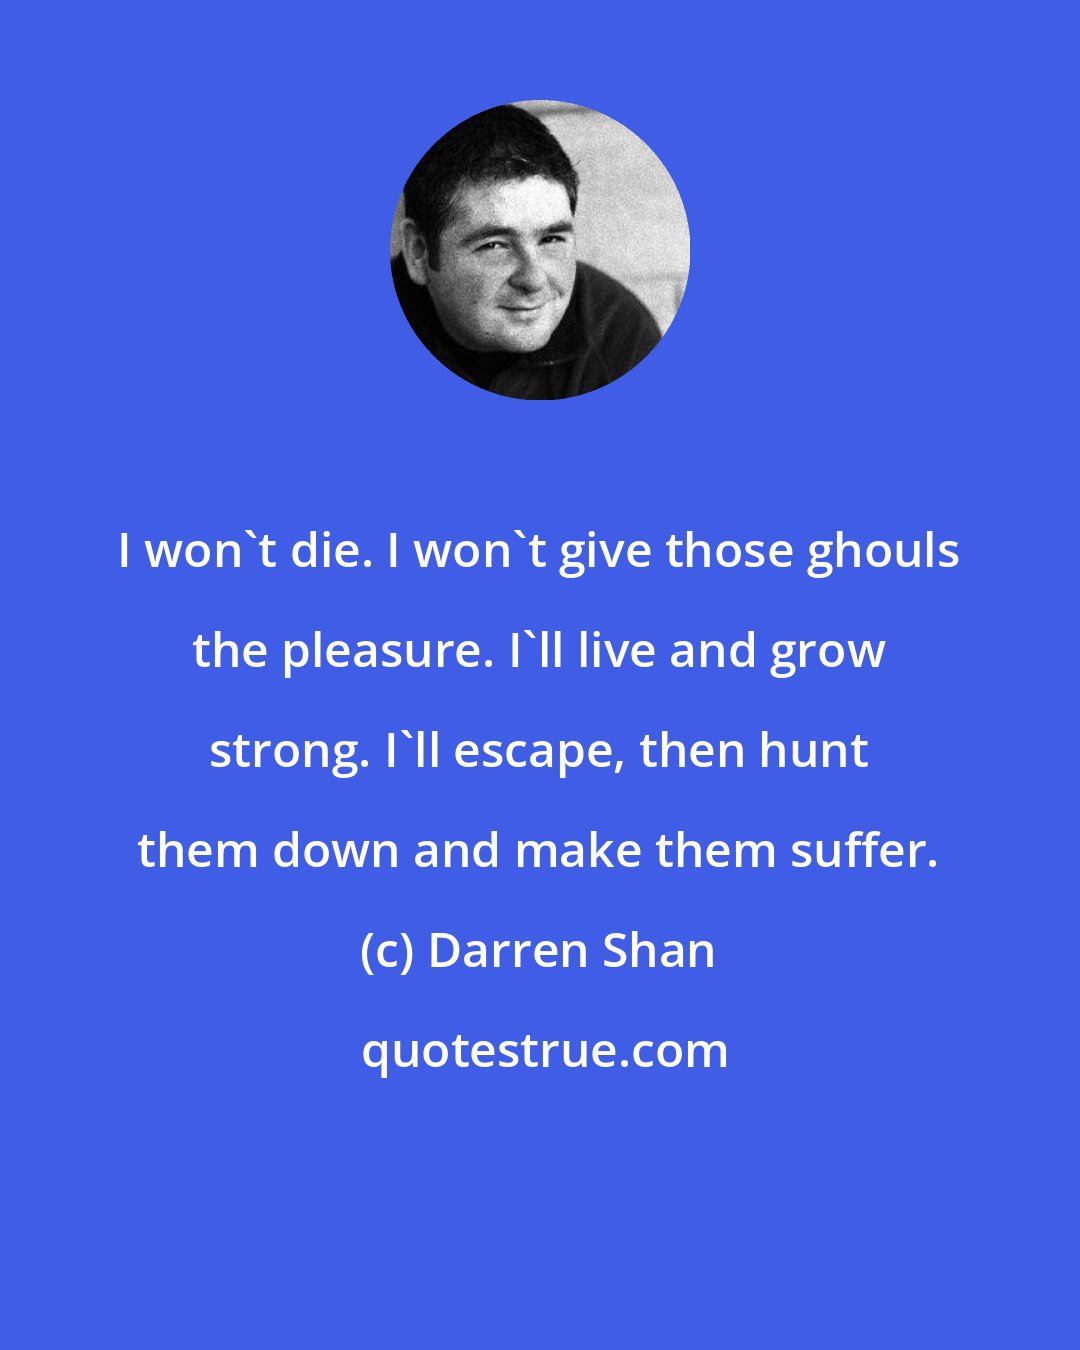 Darren Shan: I won't die. I won't give those ghouls the pleasure. I'll live and grow strong. I'll escape, then hunt them down and make them suffer.